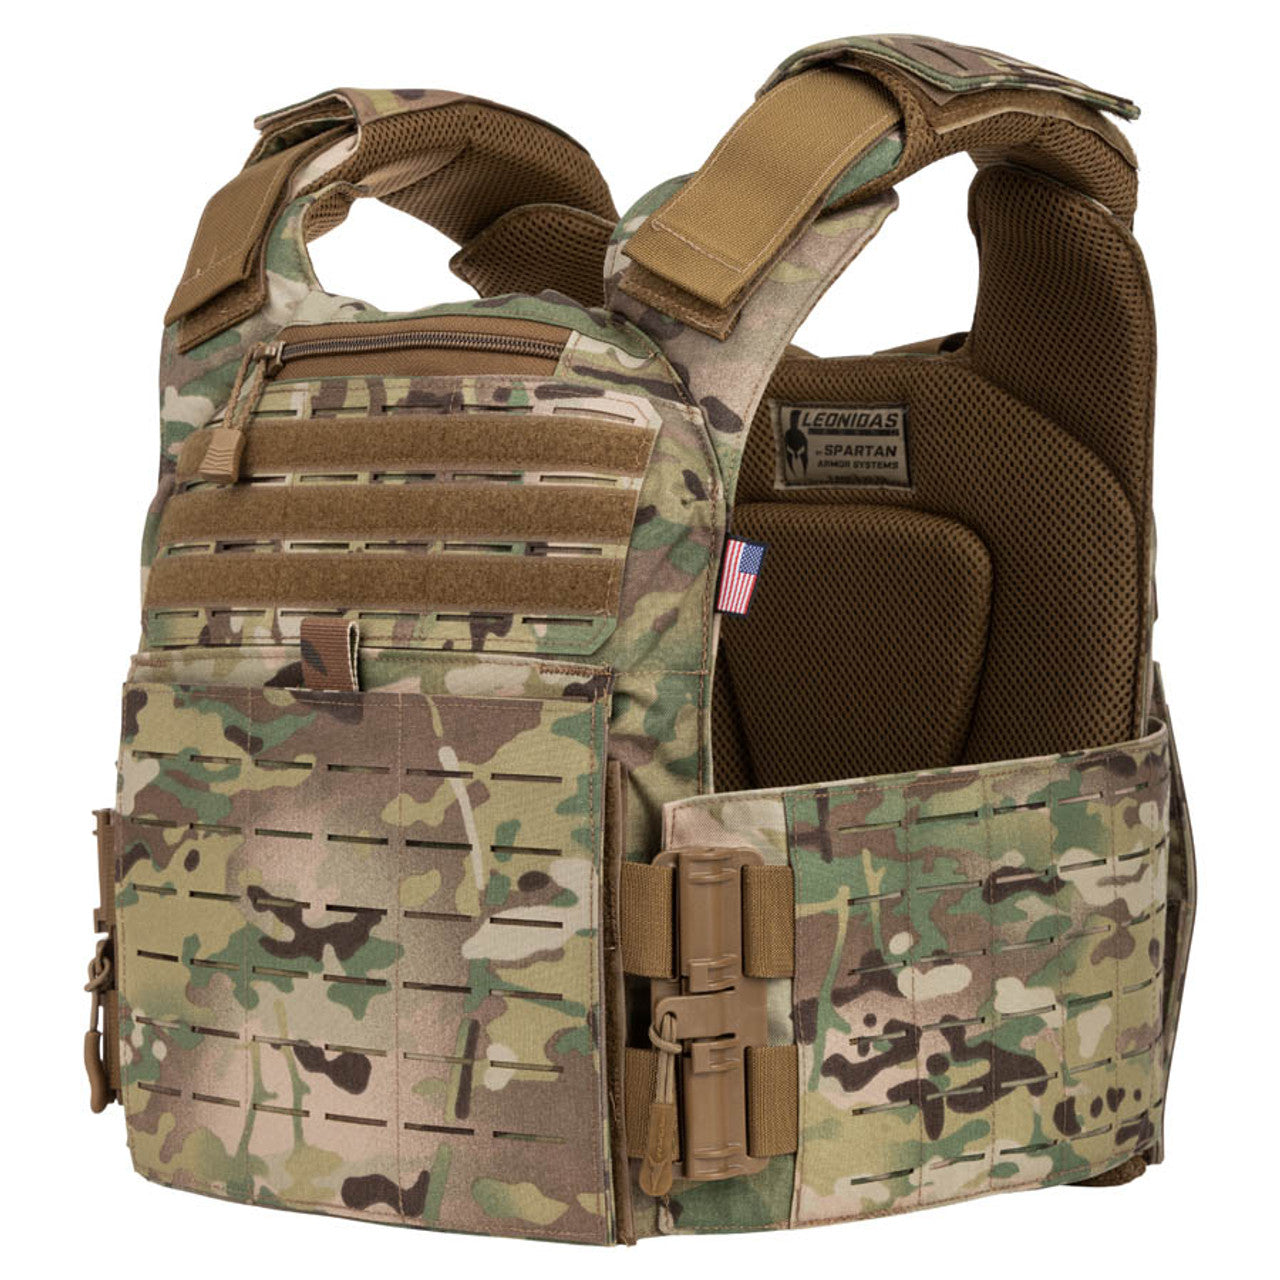 A Spartan Armor Systems Leonidas Legend Plate Carrier - Made in U.S.A. on a white background.